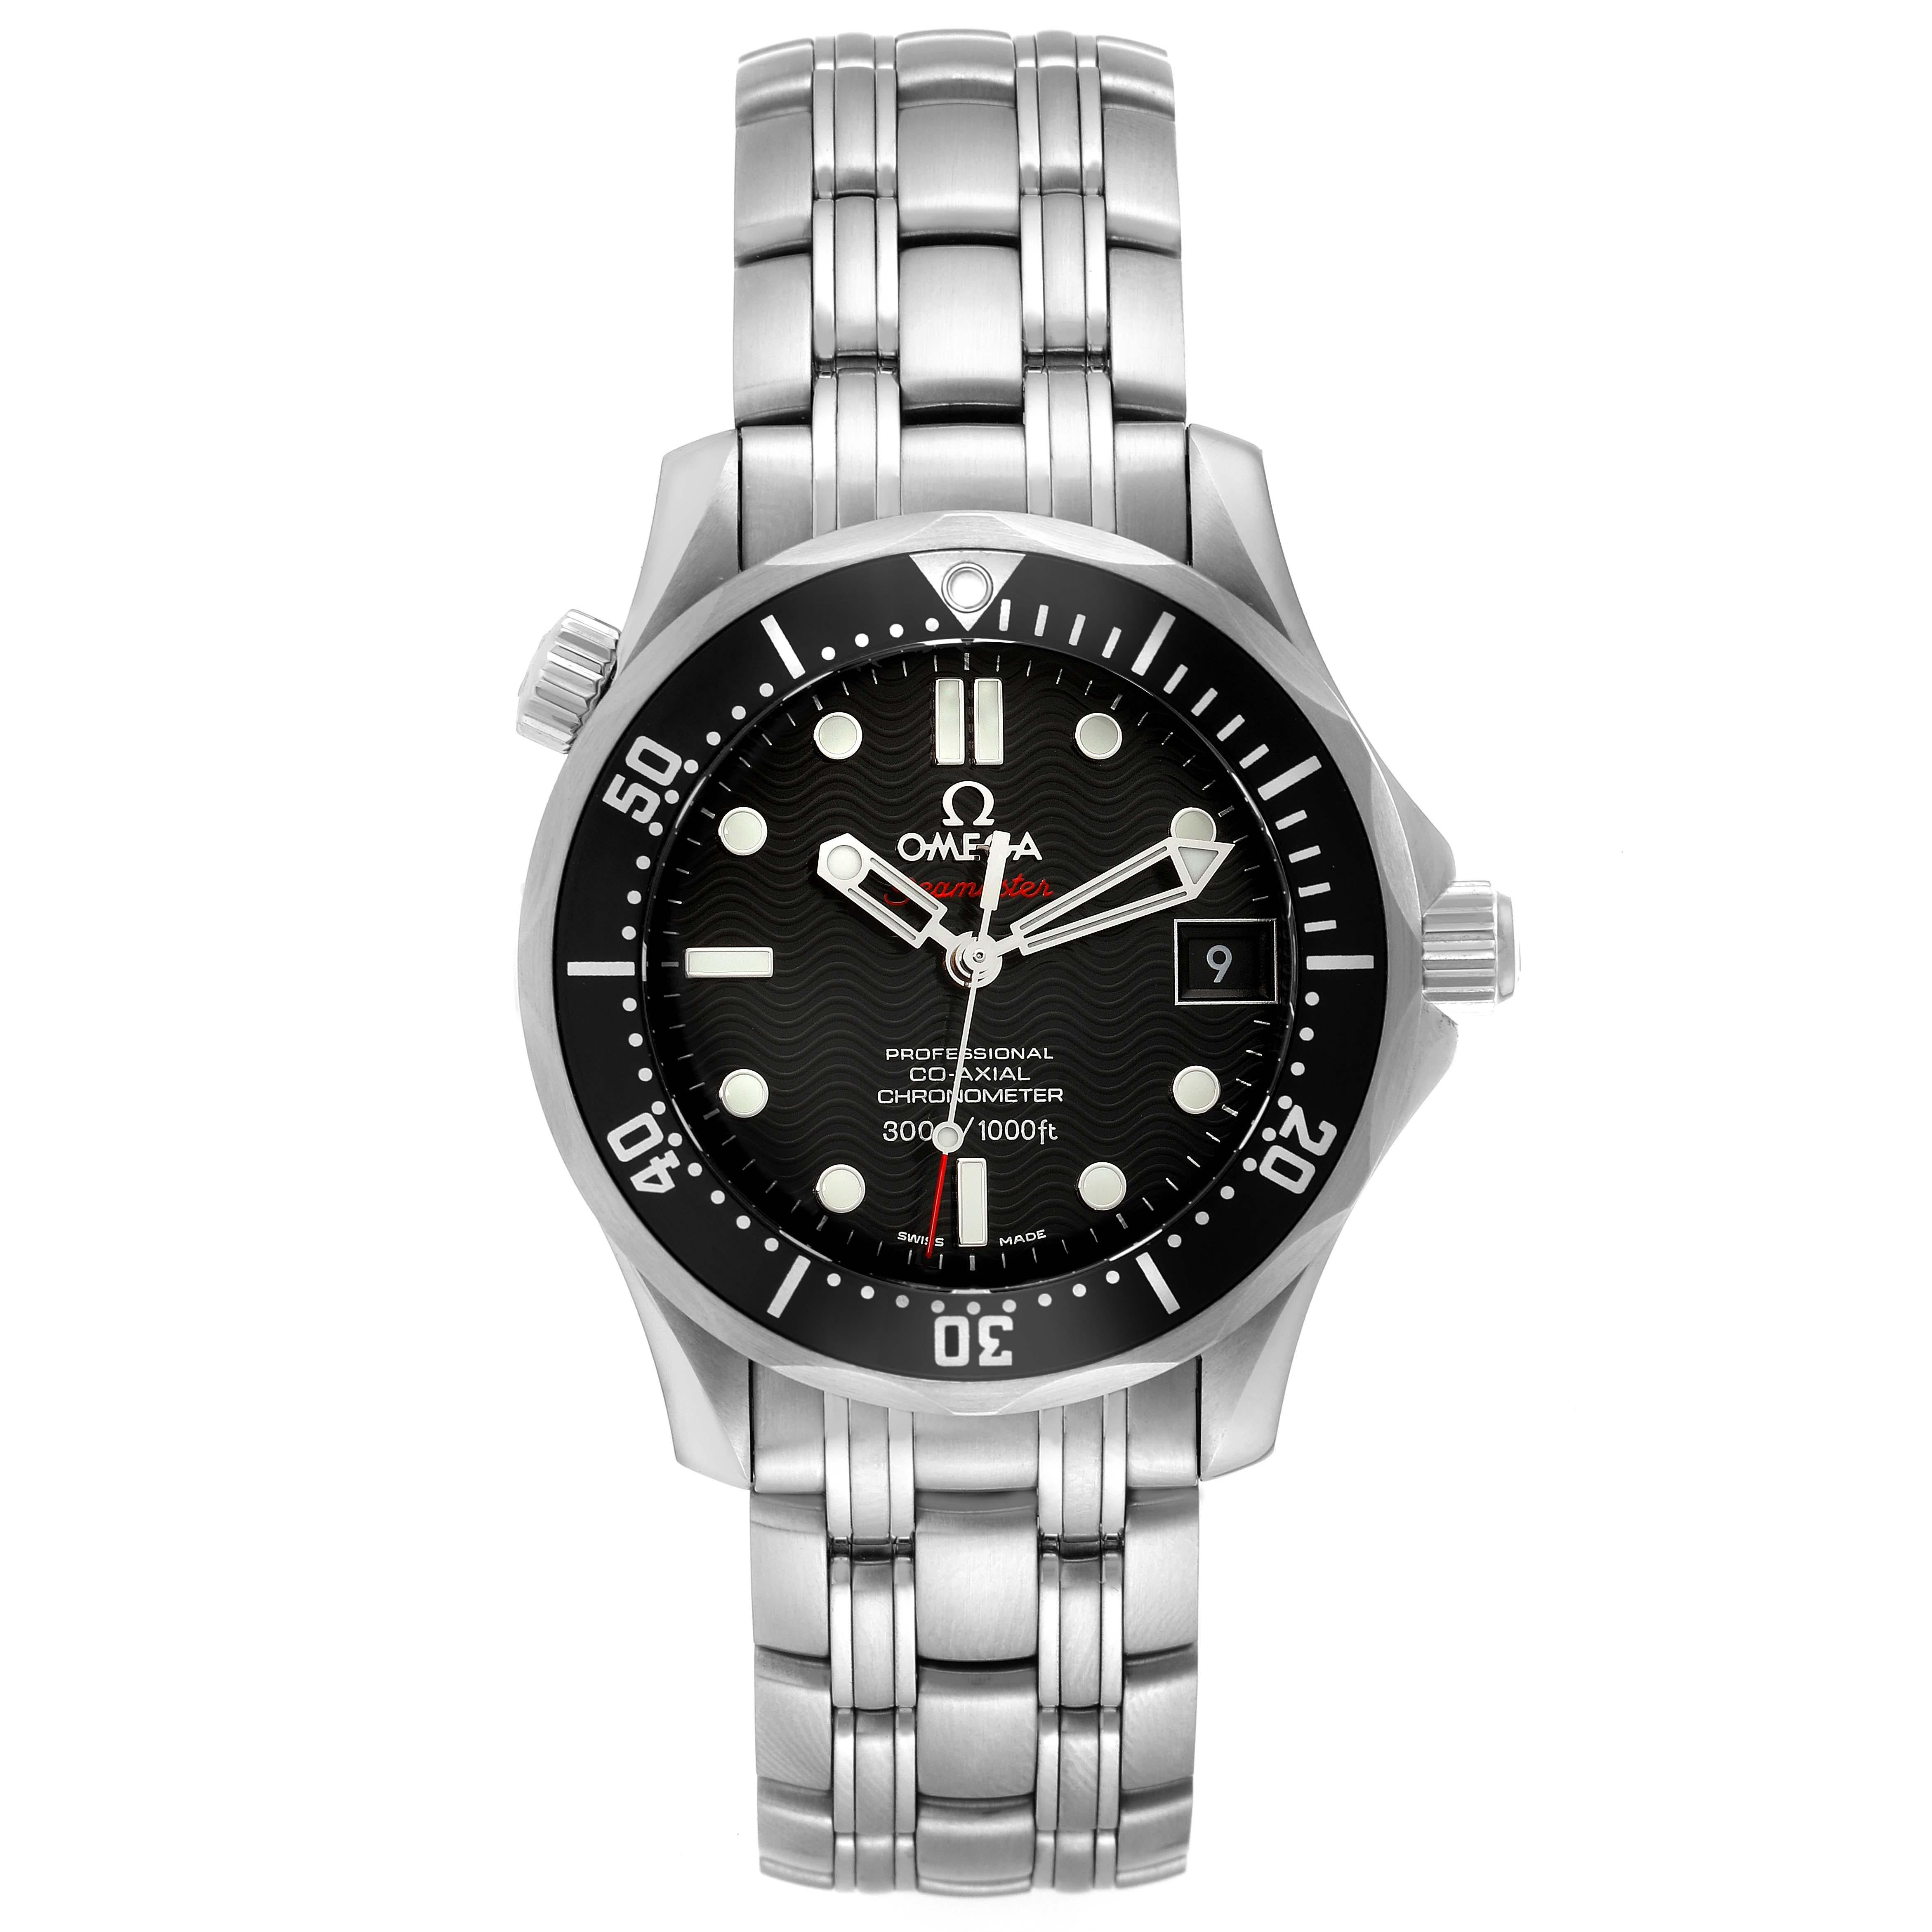 Omega Seamaster 300M Midsize 36 Mens Watch 212.30.36.20.01.001 Box Card. Automatic self-winding movement. Stainless steel round case 36.25 mm in diameter. Black unidirectional rotating bezel. Scratch resistant sapphire crystal. Black wave decor dial